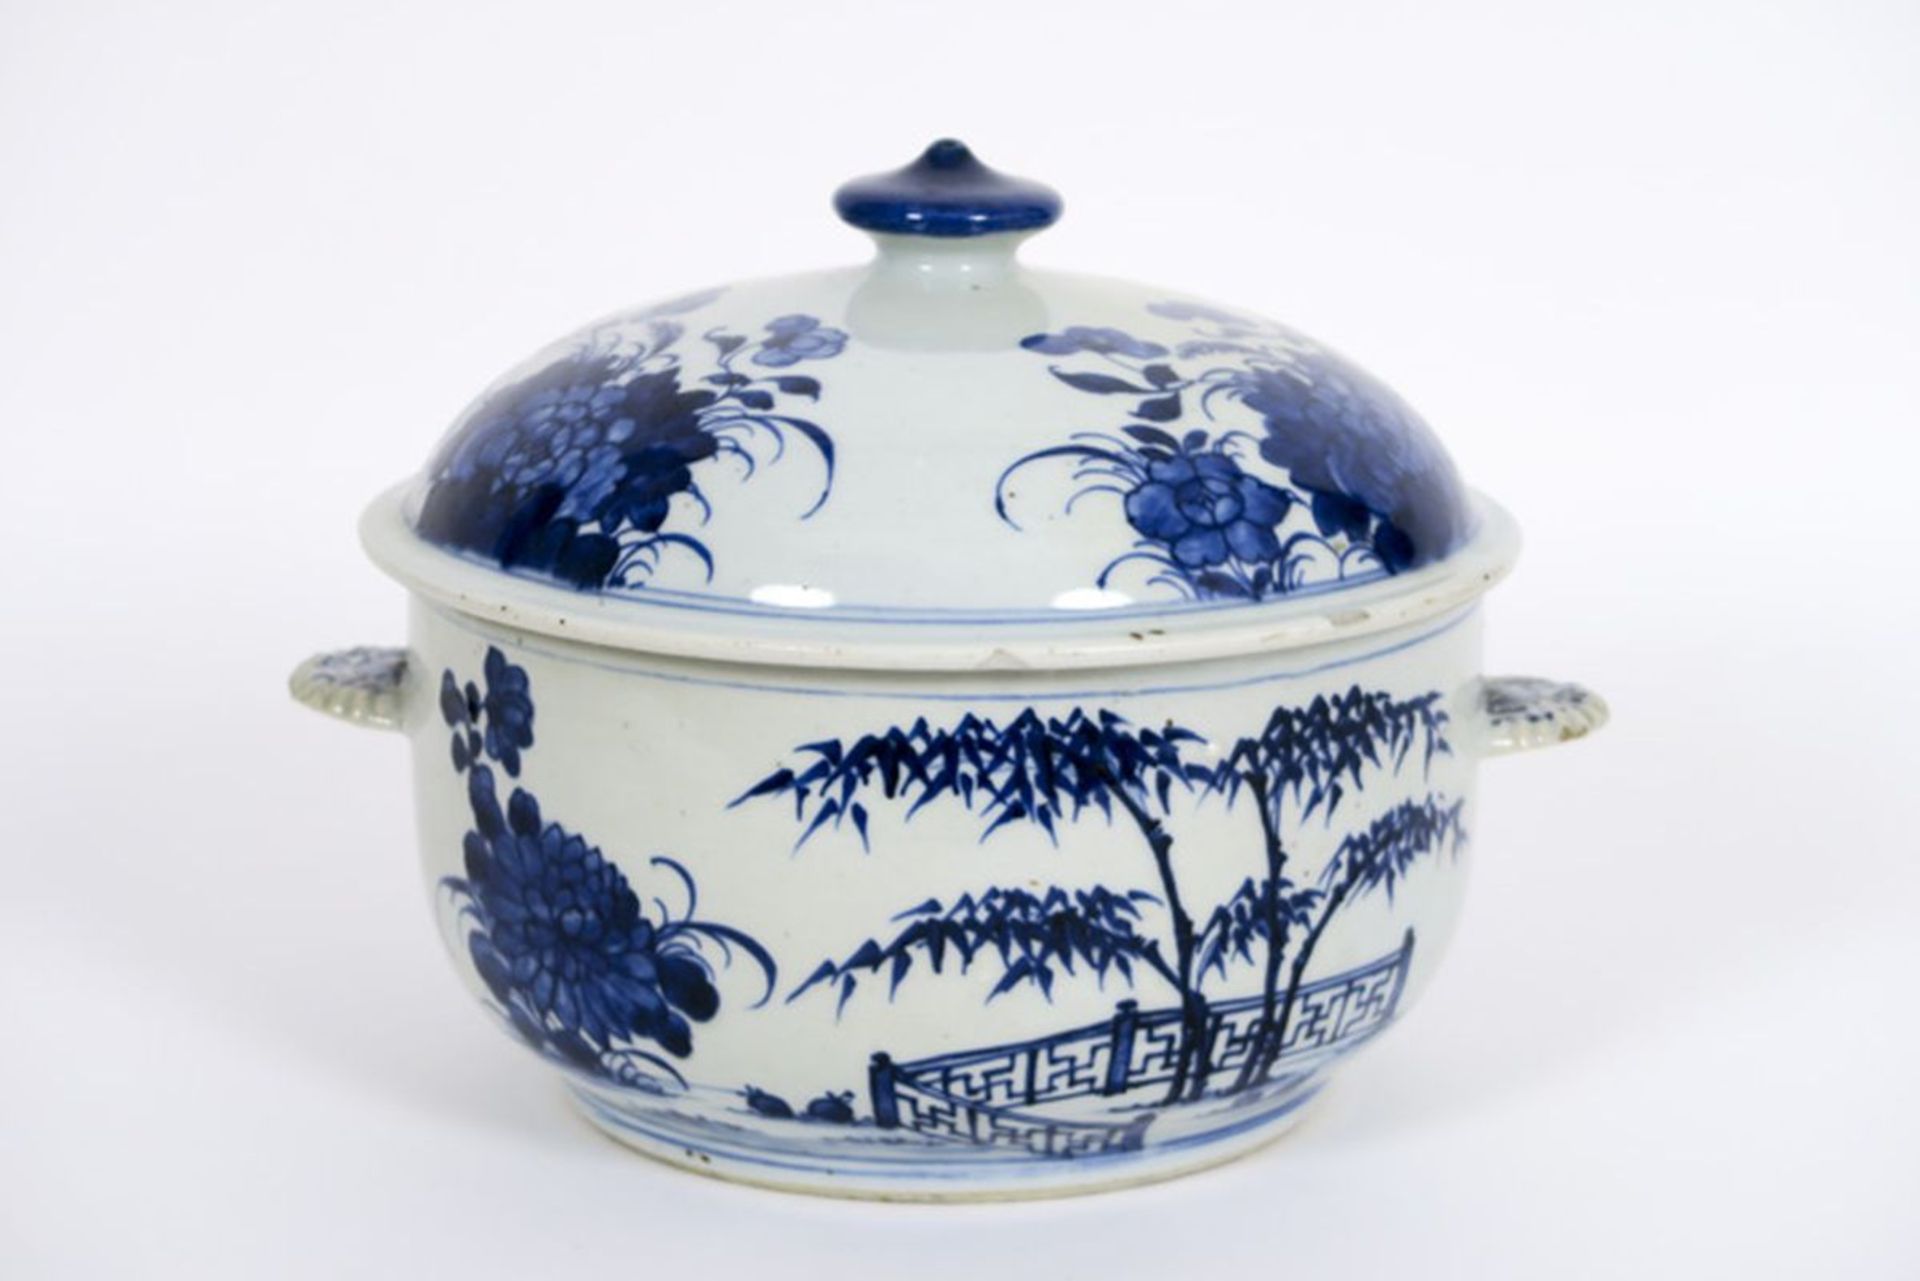 18th Cent. Chinese lidded tureen in porcelain with blue-white decor - - Achttiende [...] - Image 2 of 4